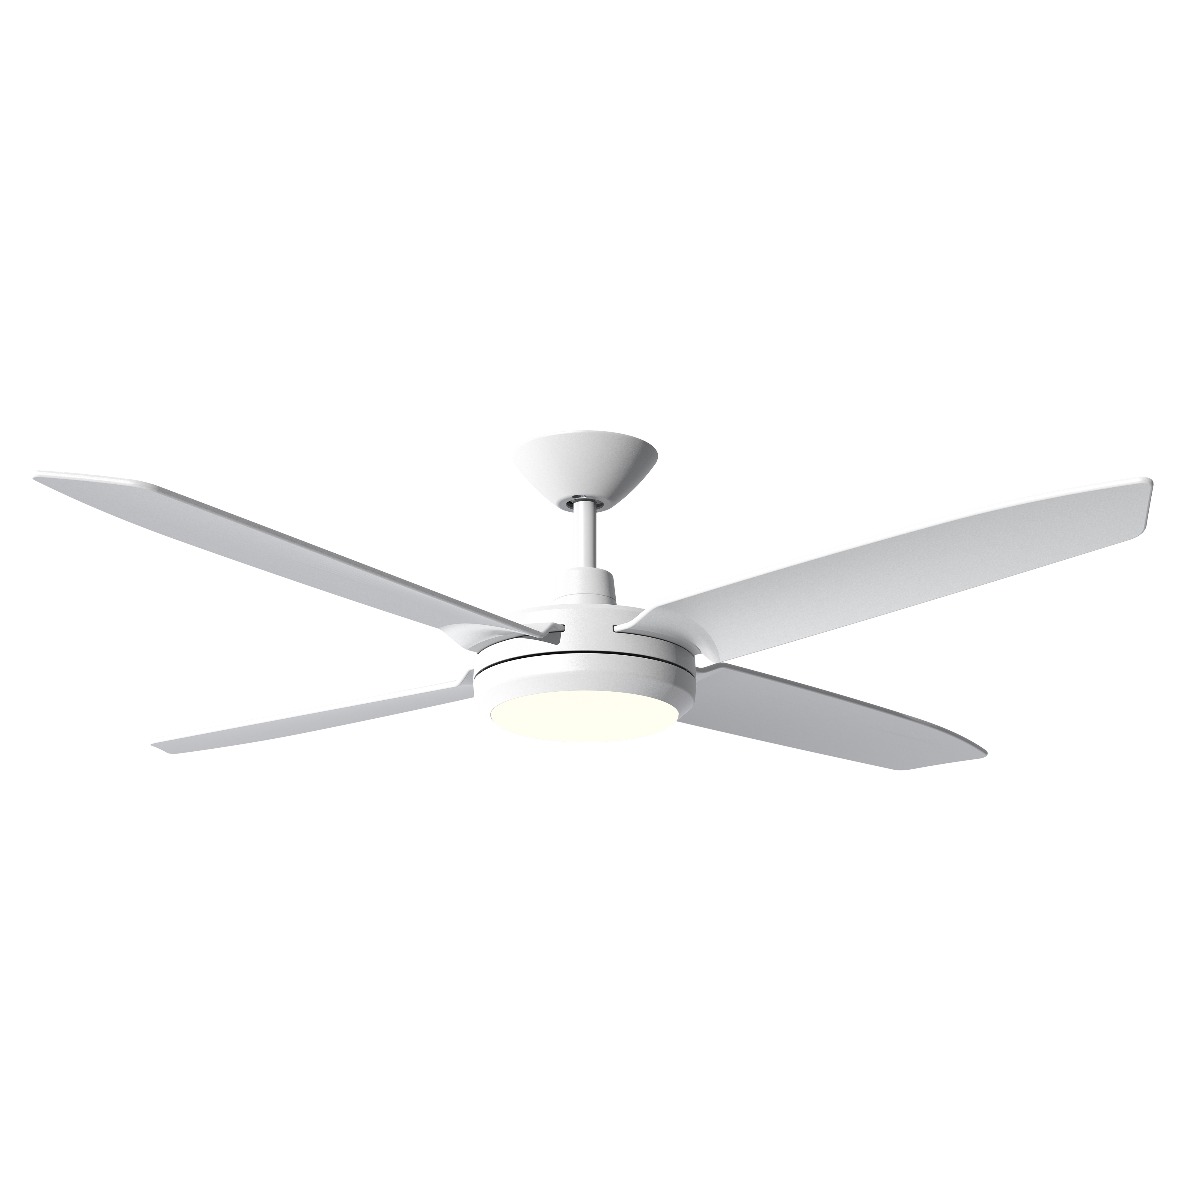 Airborne Enviro DC Ceiling Fan with CCT LED Light and Remote - White 60"